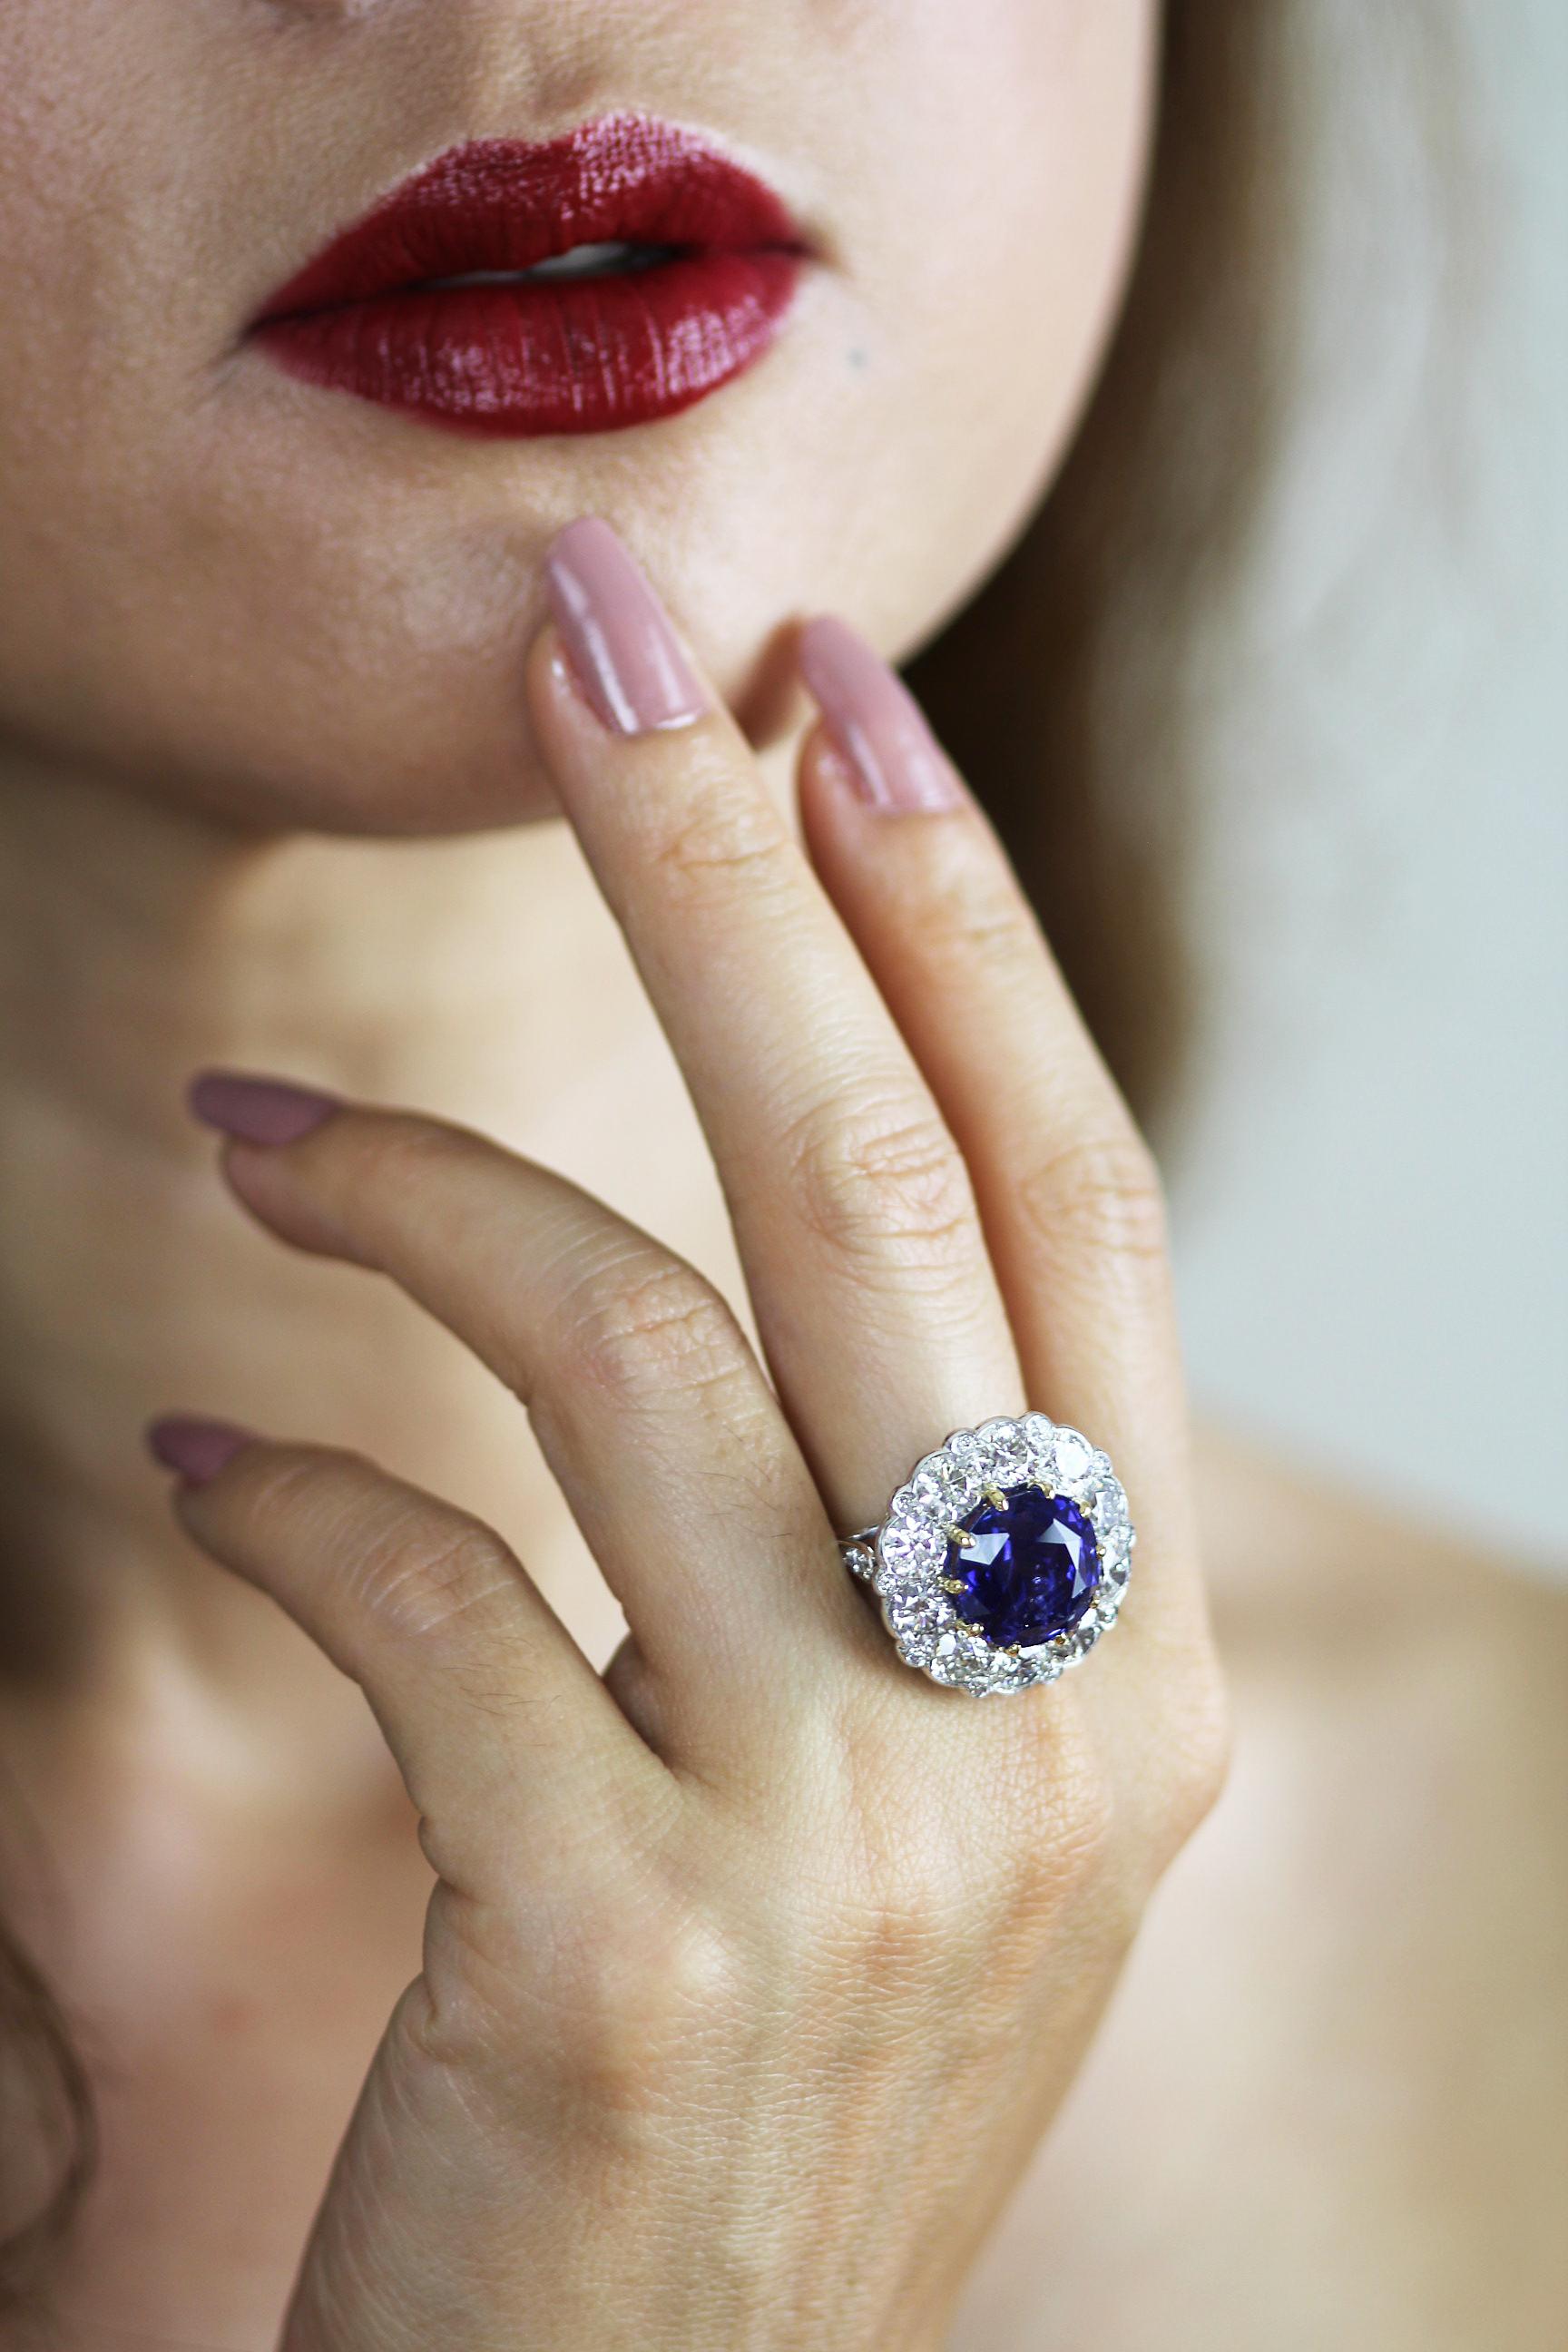 Sapphire and diamond ring set in platinum. Centering a bold powerful royal blue sapphire, which is then surrounded by round brilliant diamonds on a raised platform to resemble a flower.
1 x Sapphire, square cushion shape with The Gem & Pearl